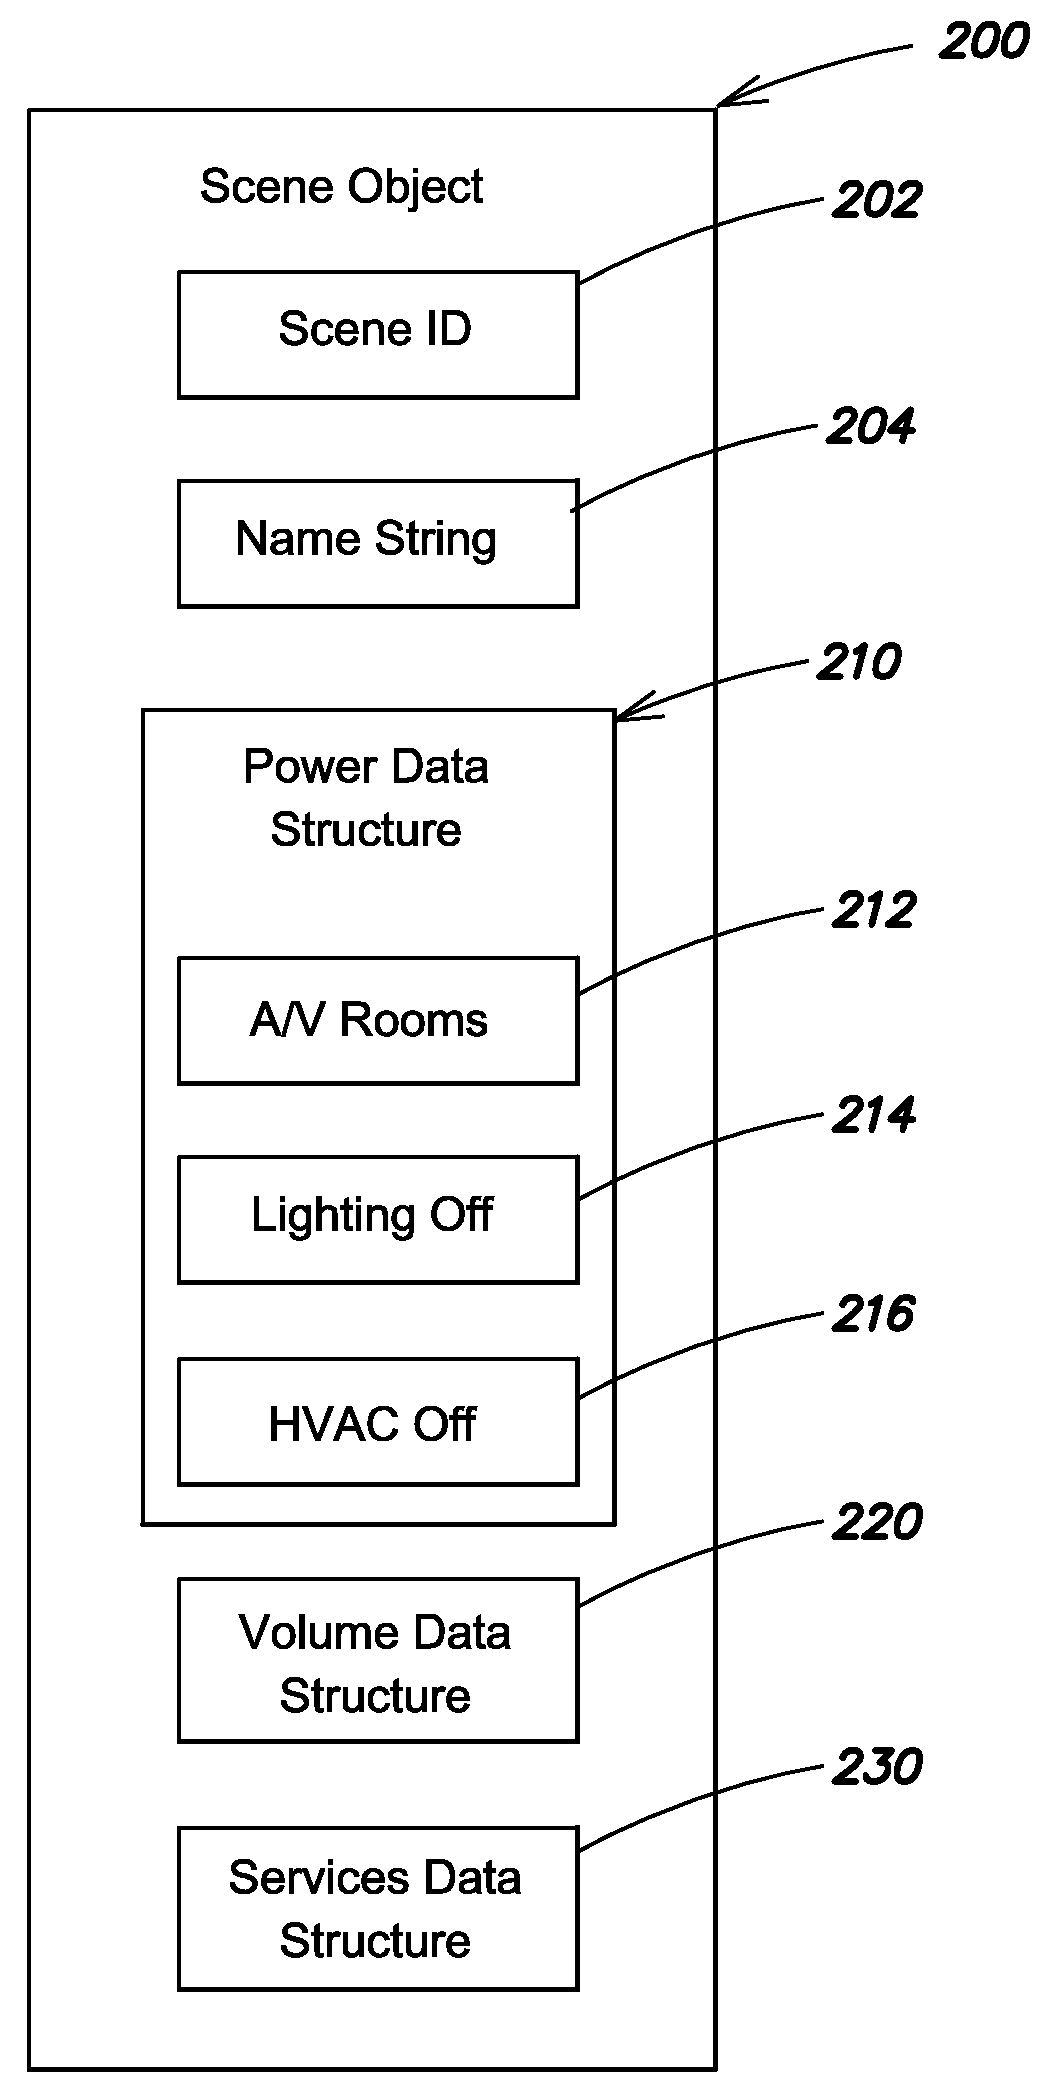 User-defined scenes for home automation